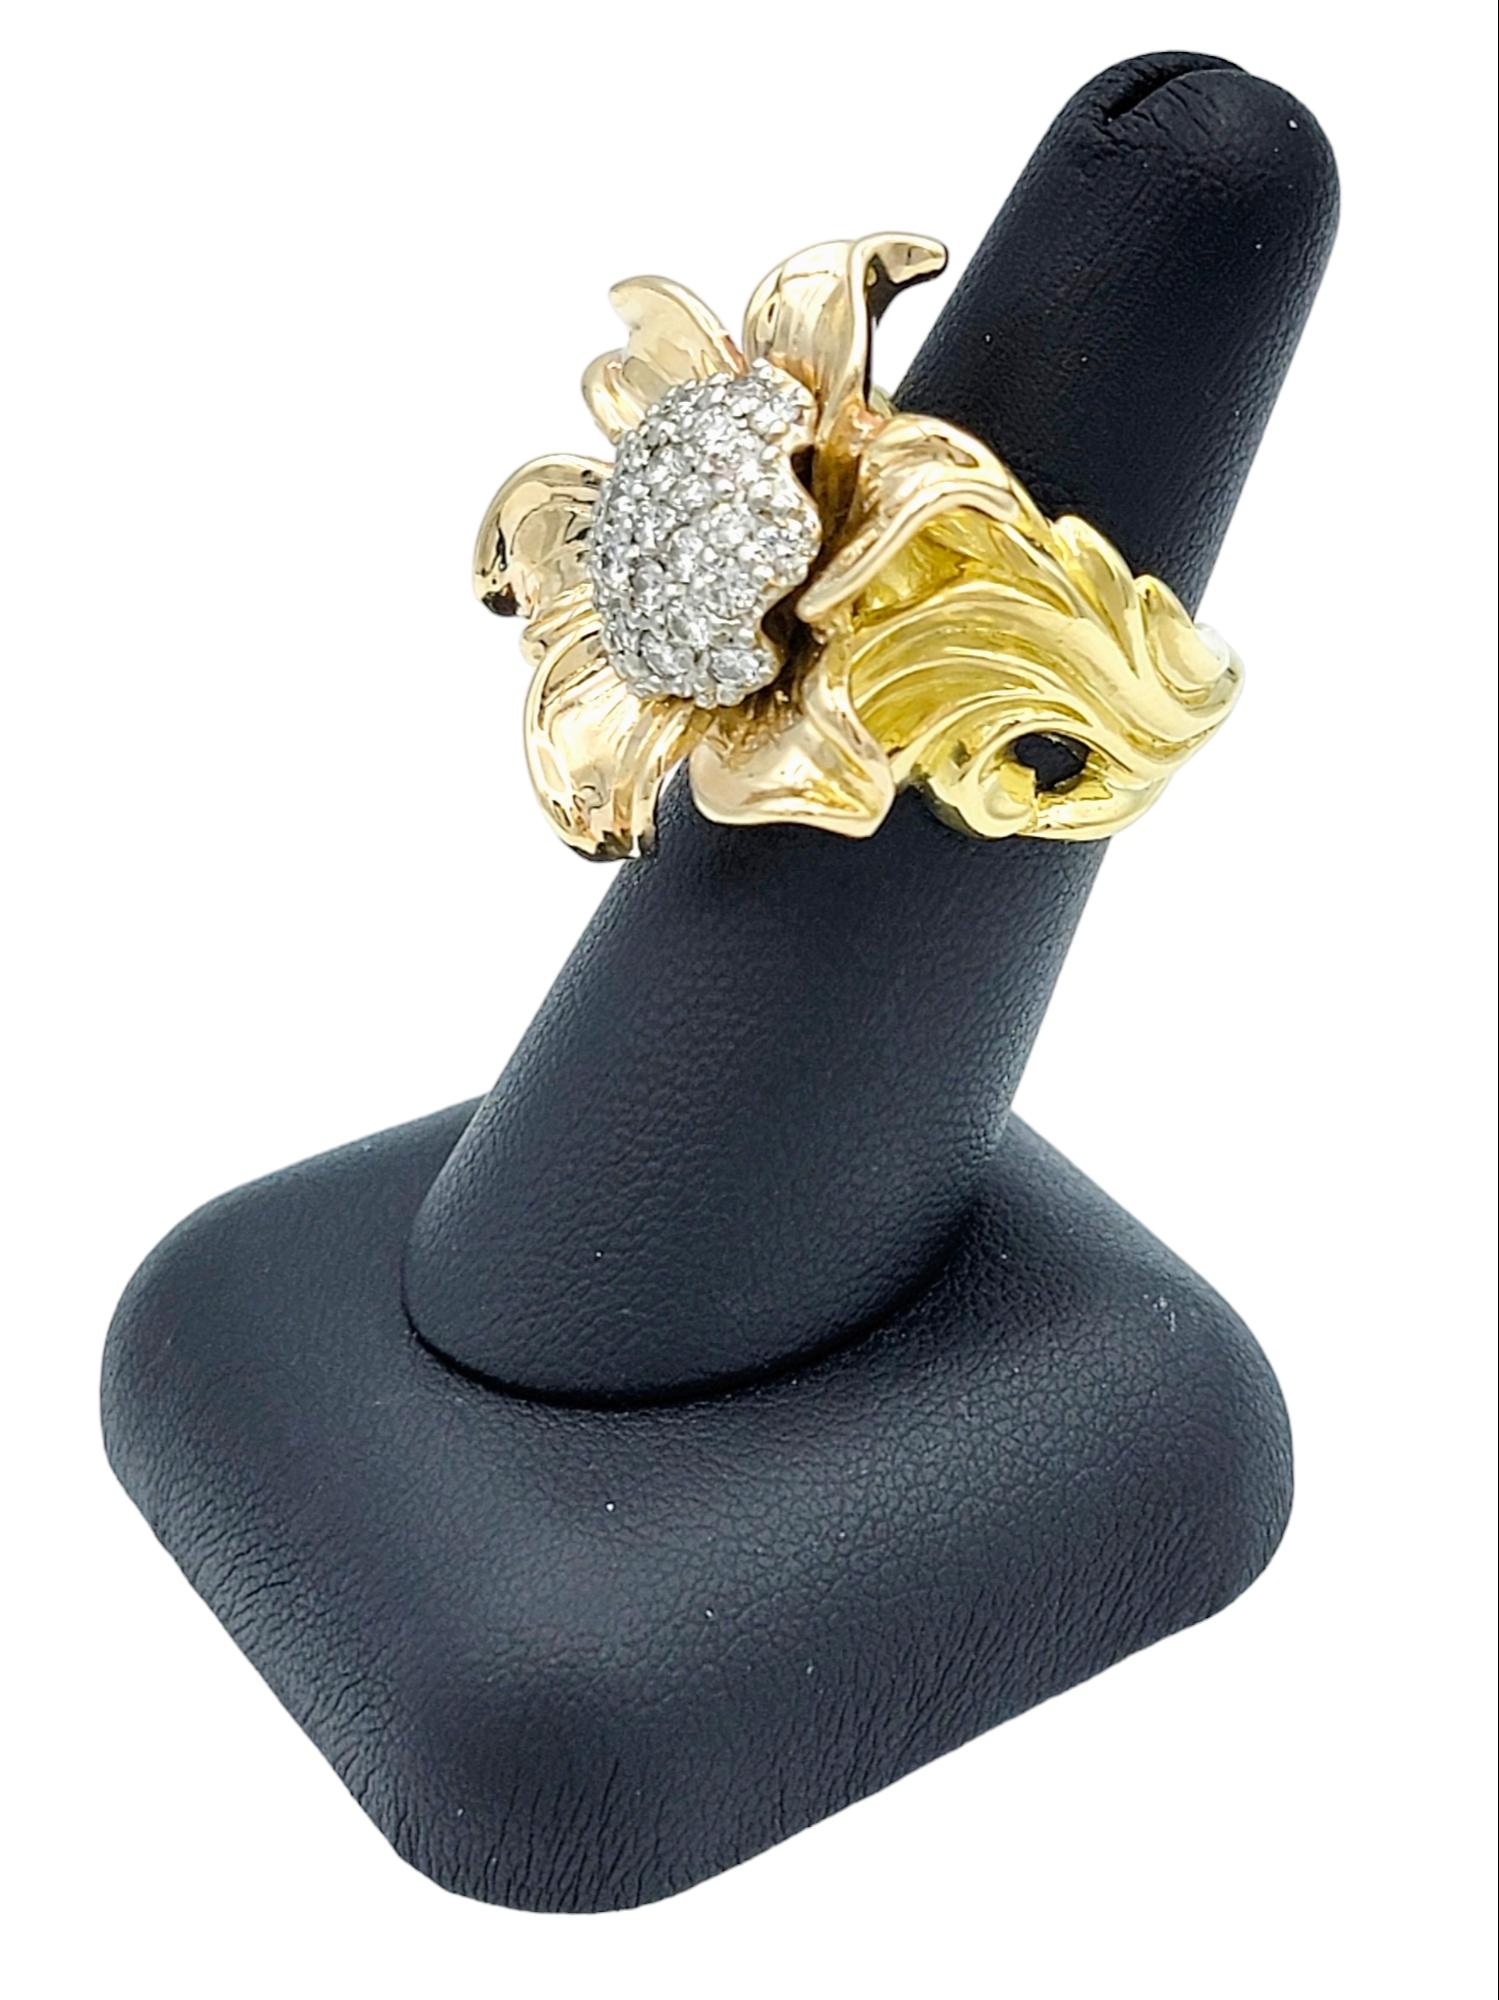 Huge Two-Tone 18 Karat Gold Sunflower Cocktail Ring with Diamond Cluster Center For Sale 5